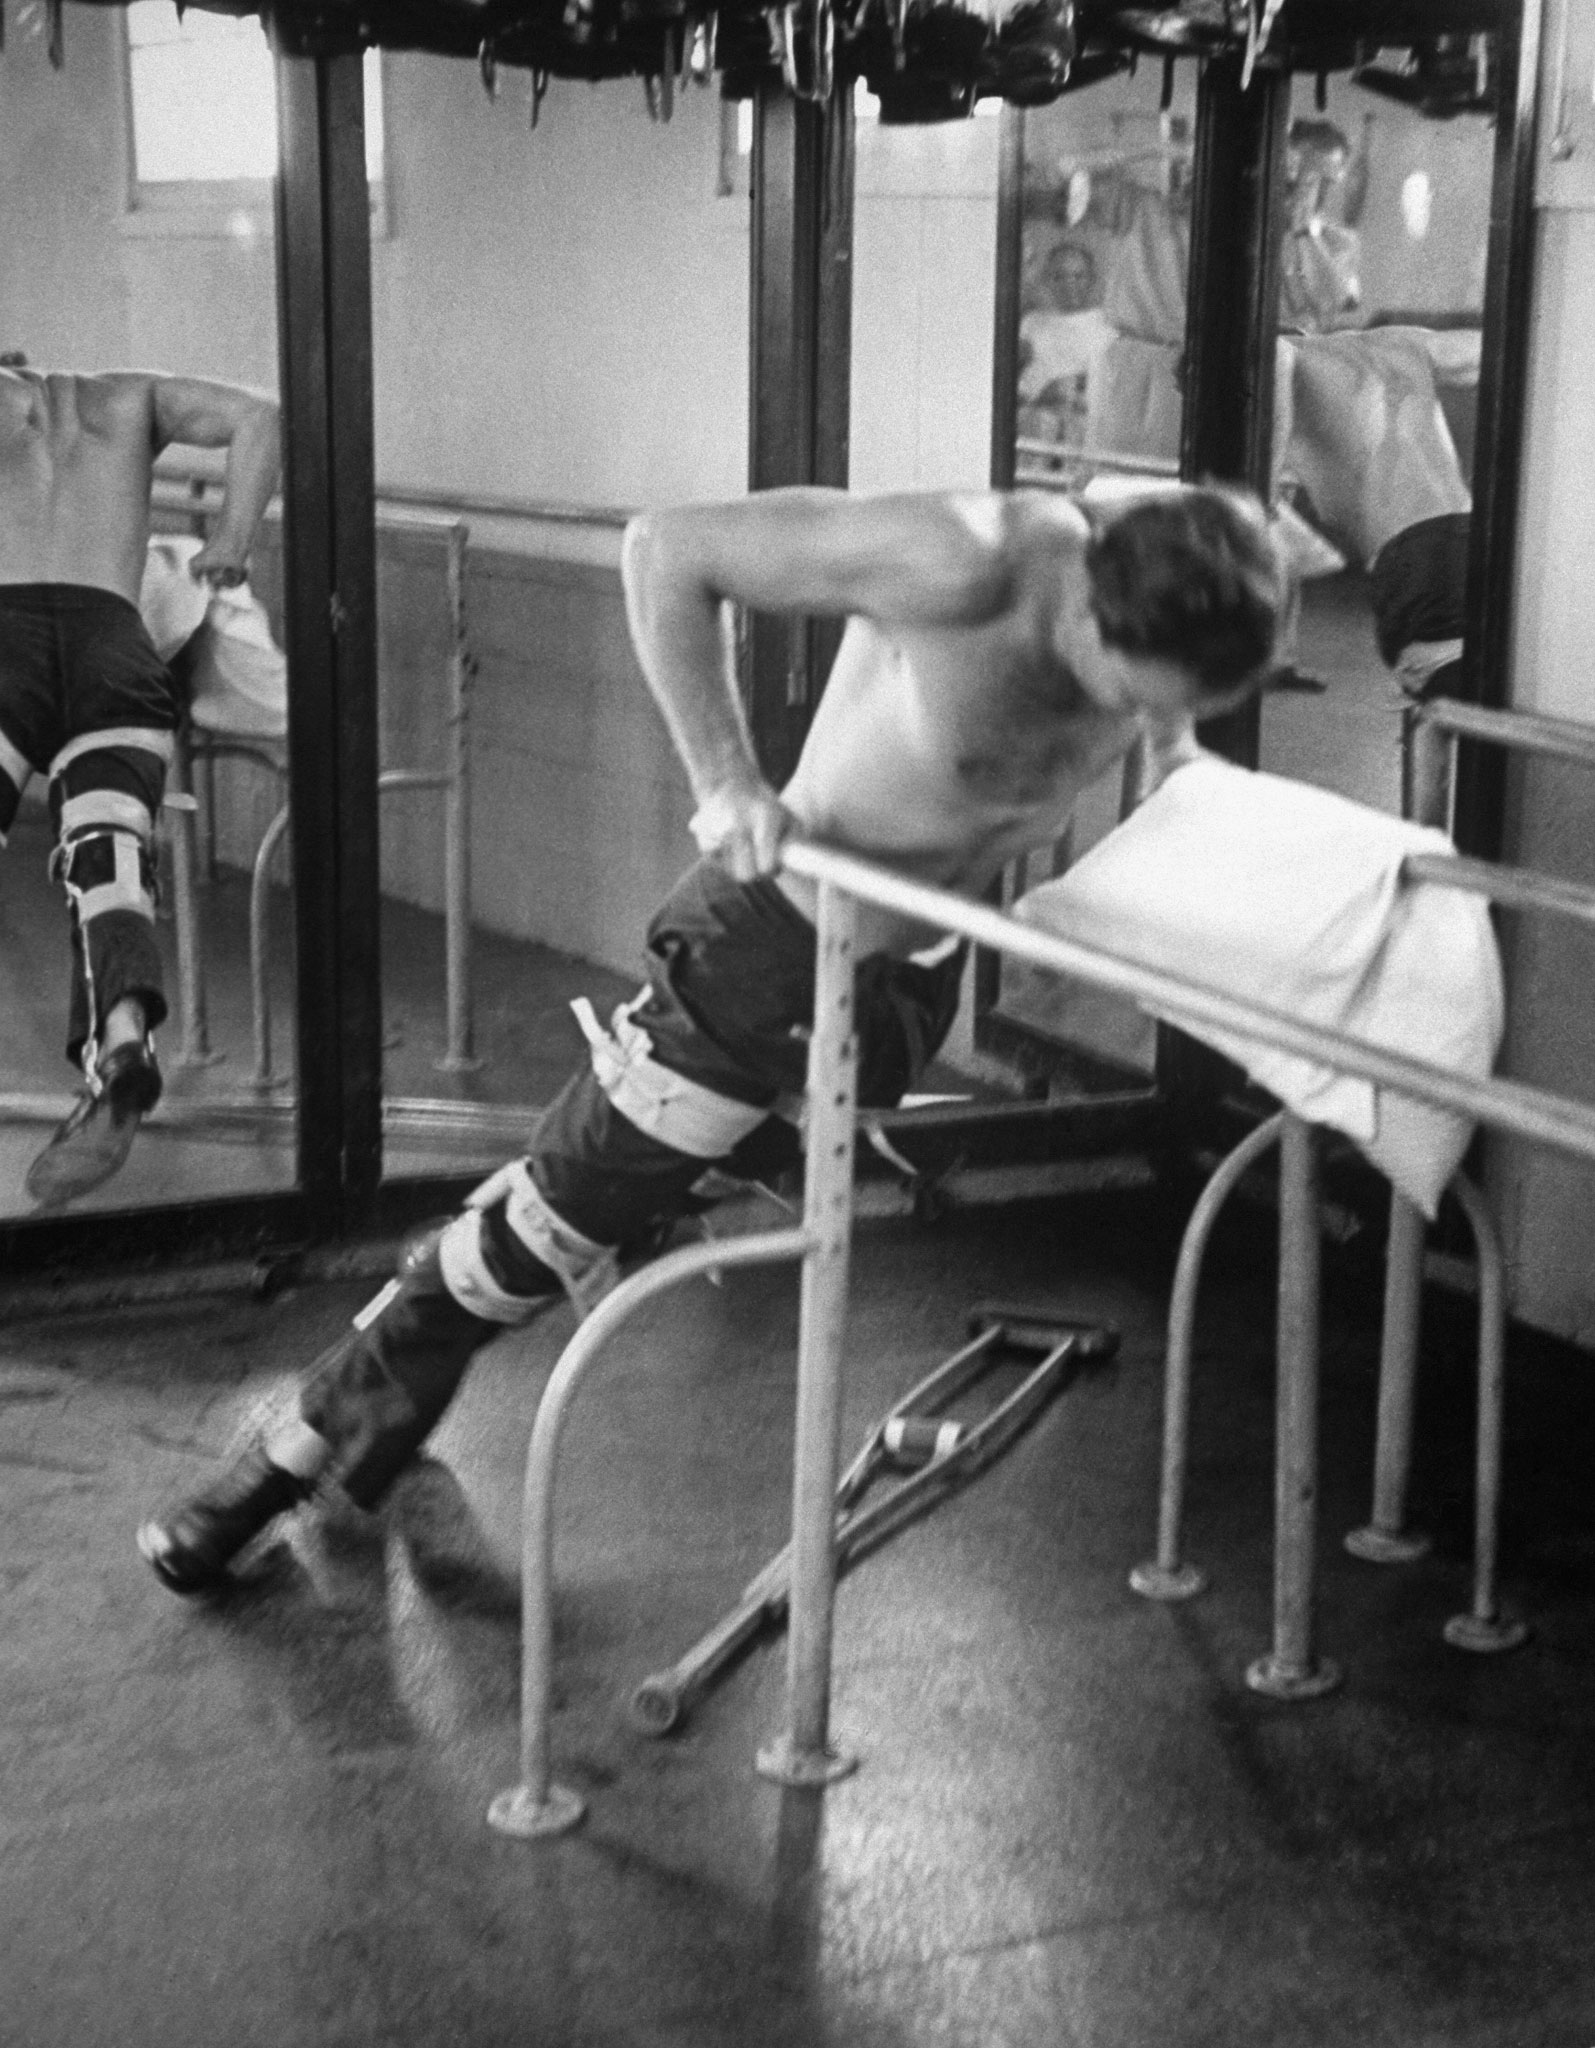 Marlon Brando while training for his role in The Men, at the Birmingham Veterans Administration Hospital, Van Nuys, Calif., 1949.